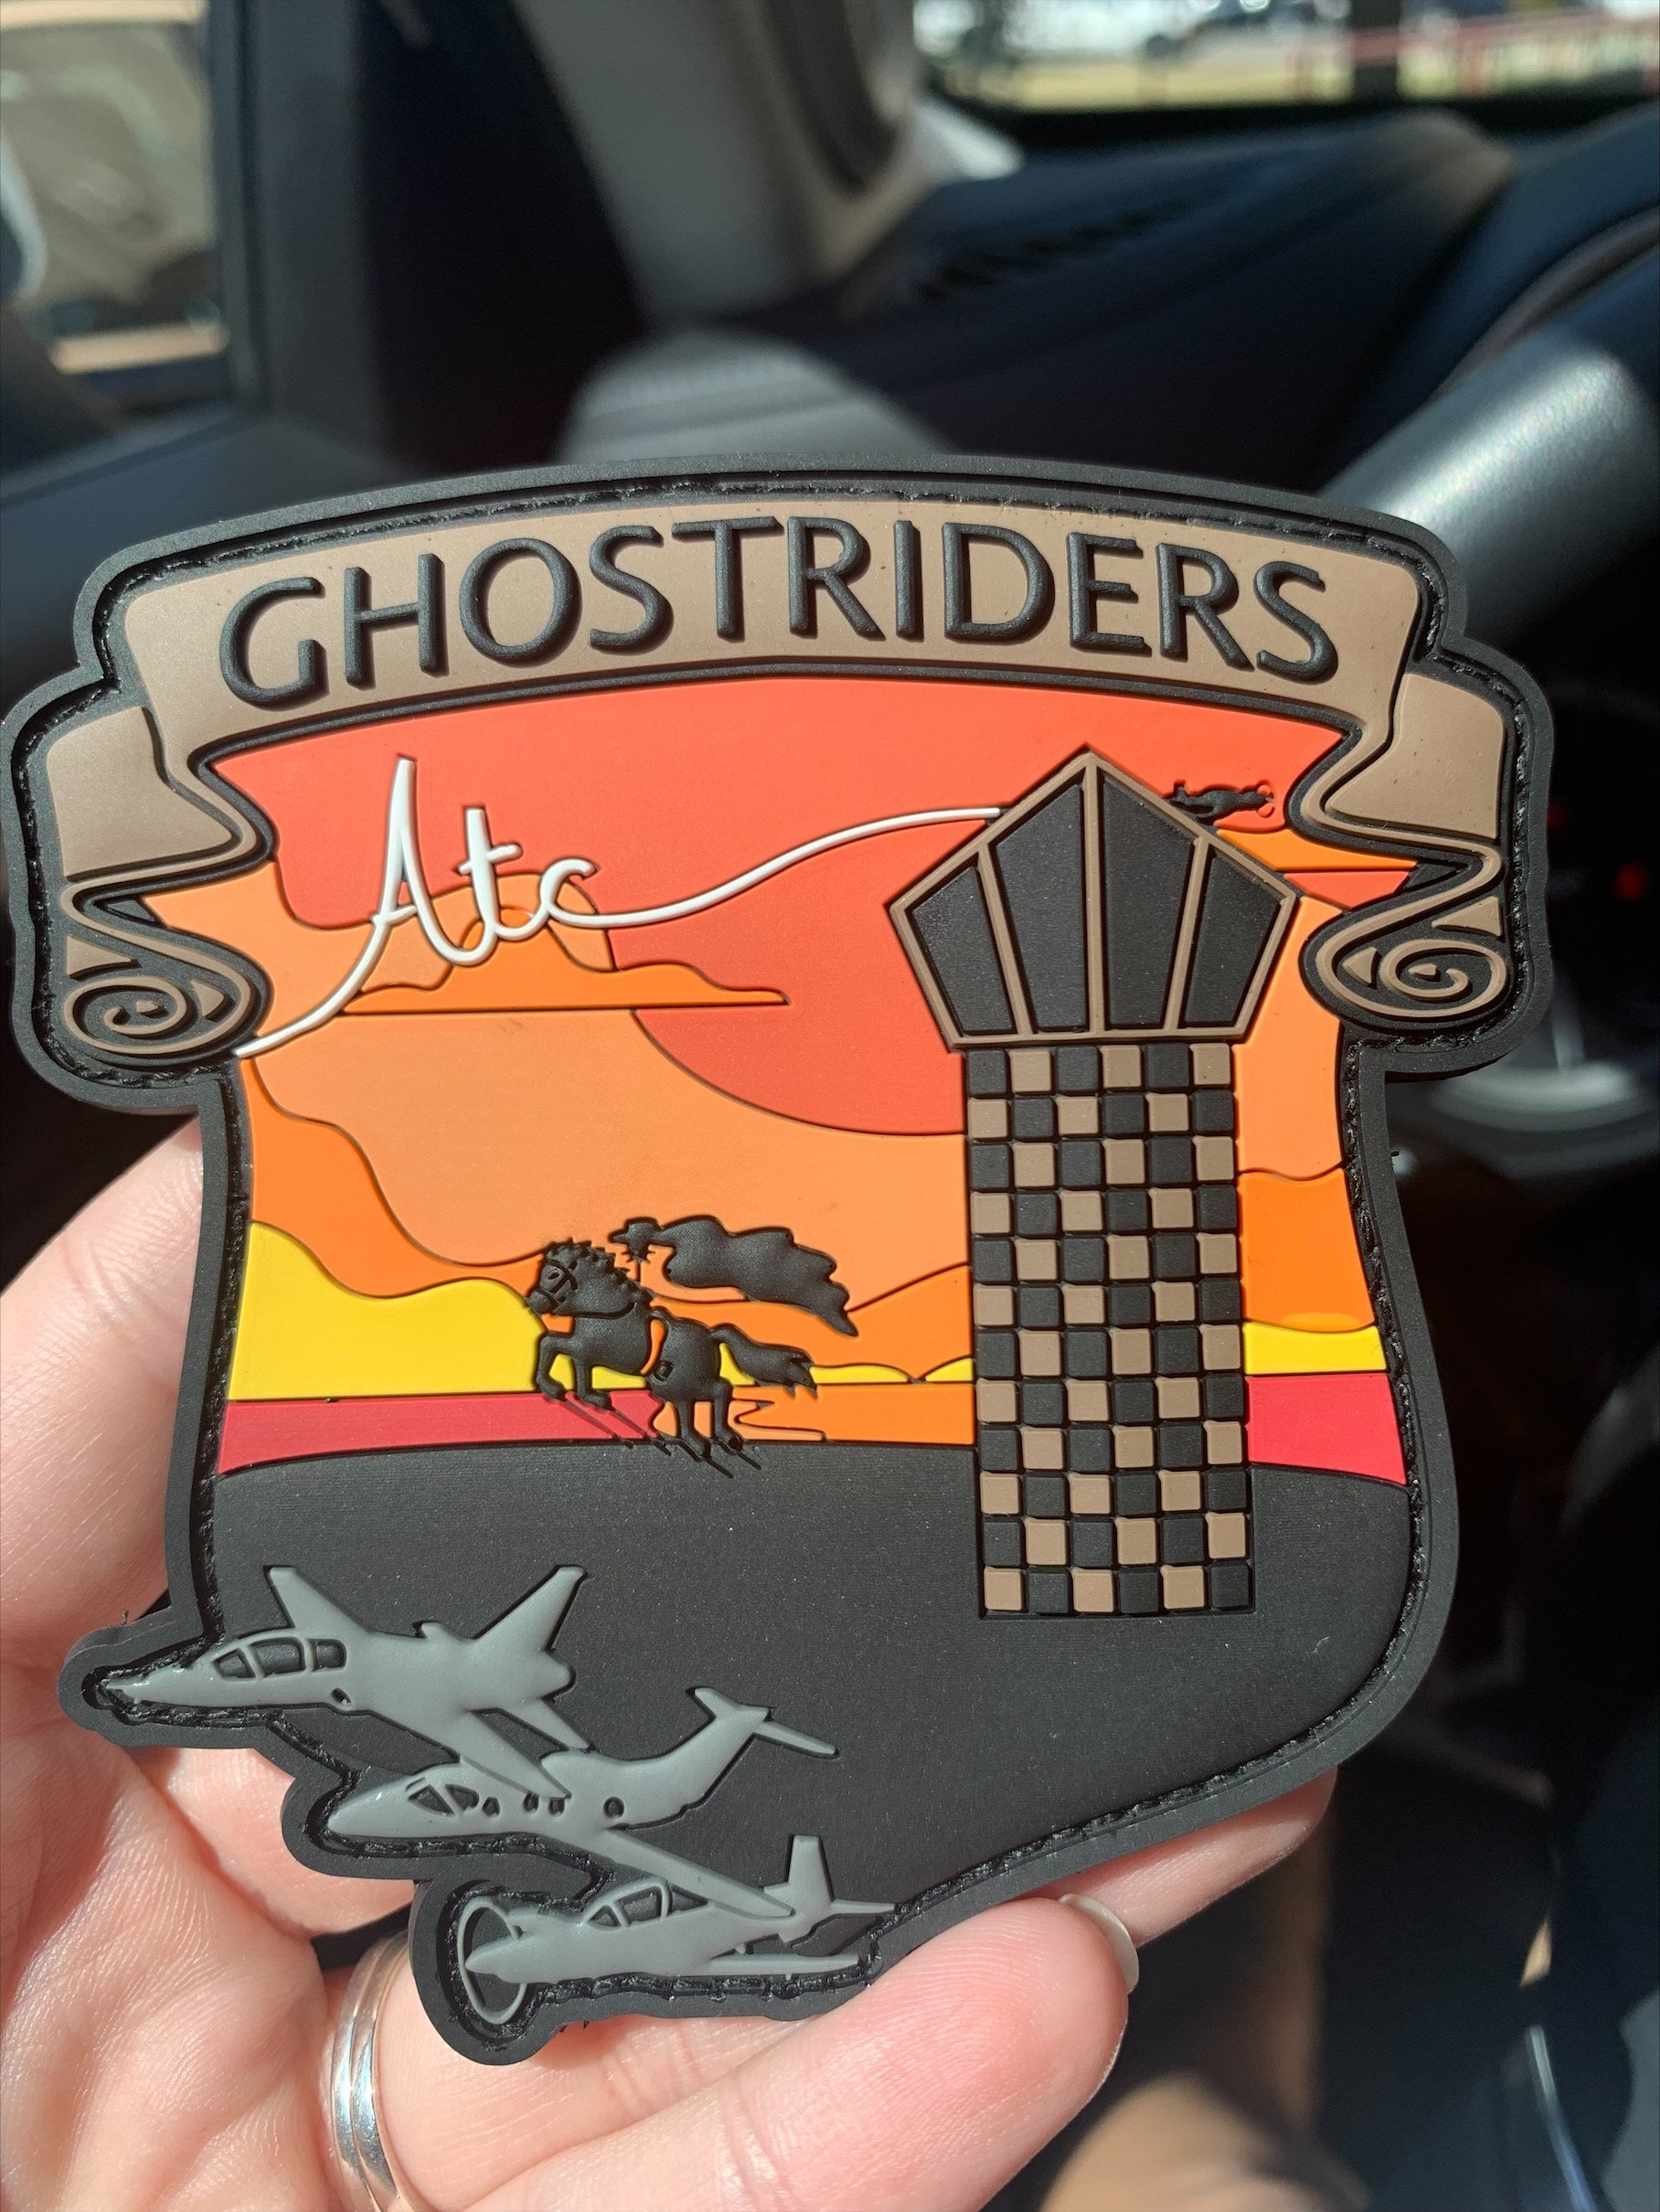 Ghostriders ATC Patch